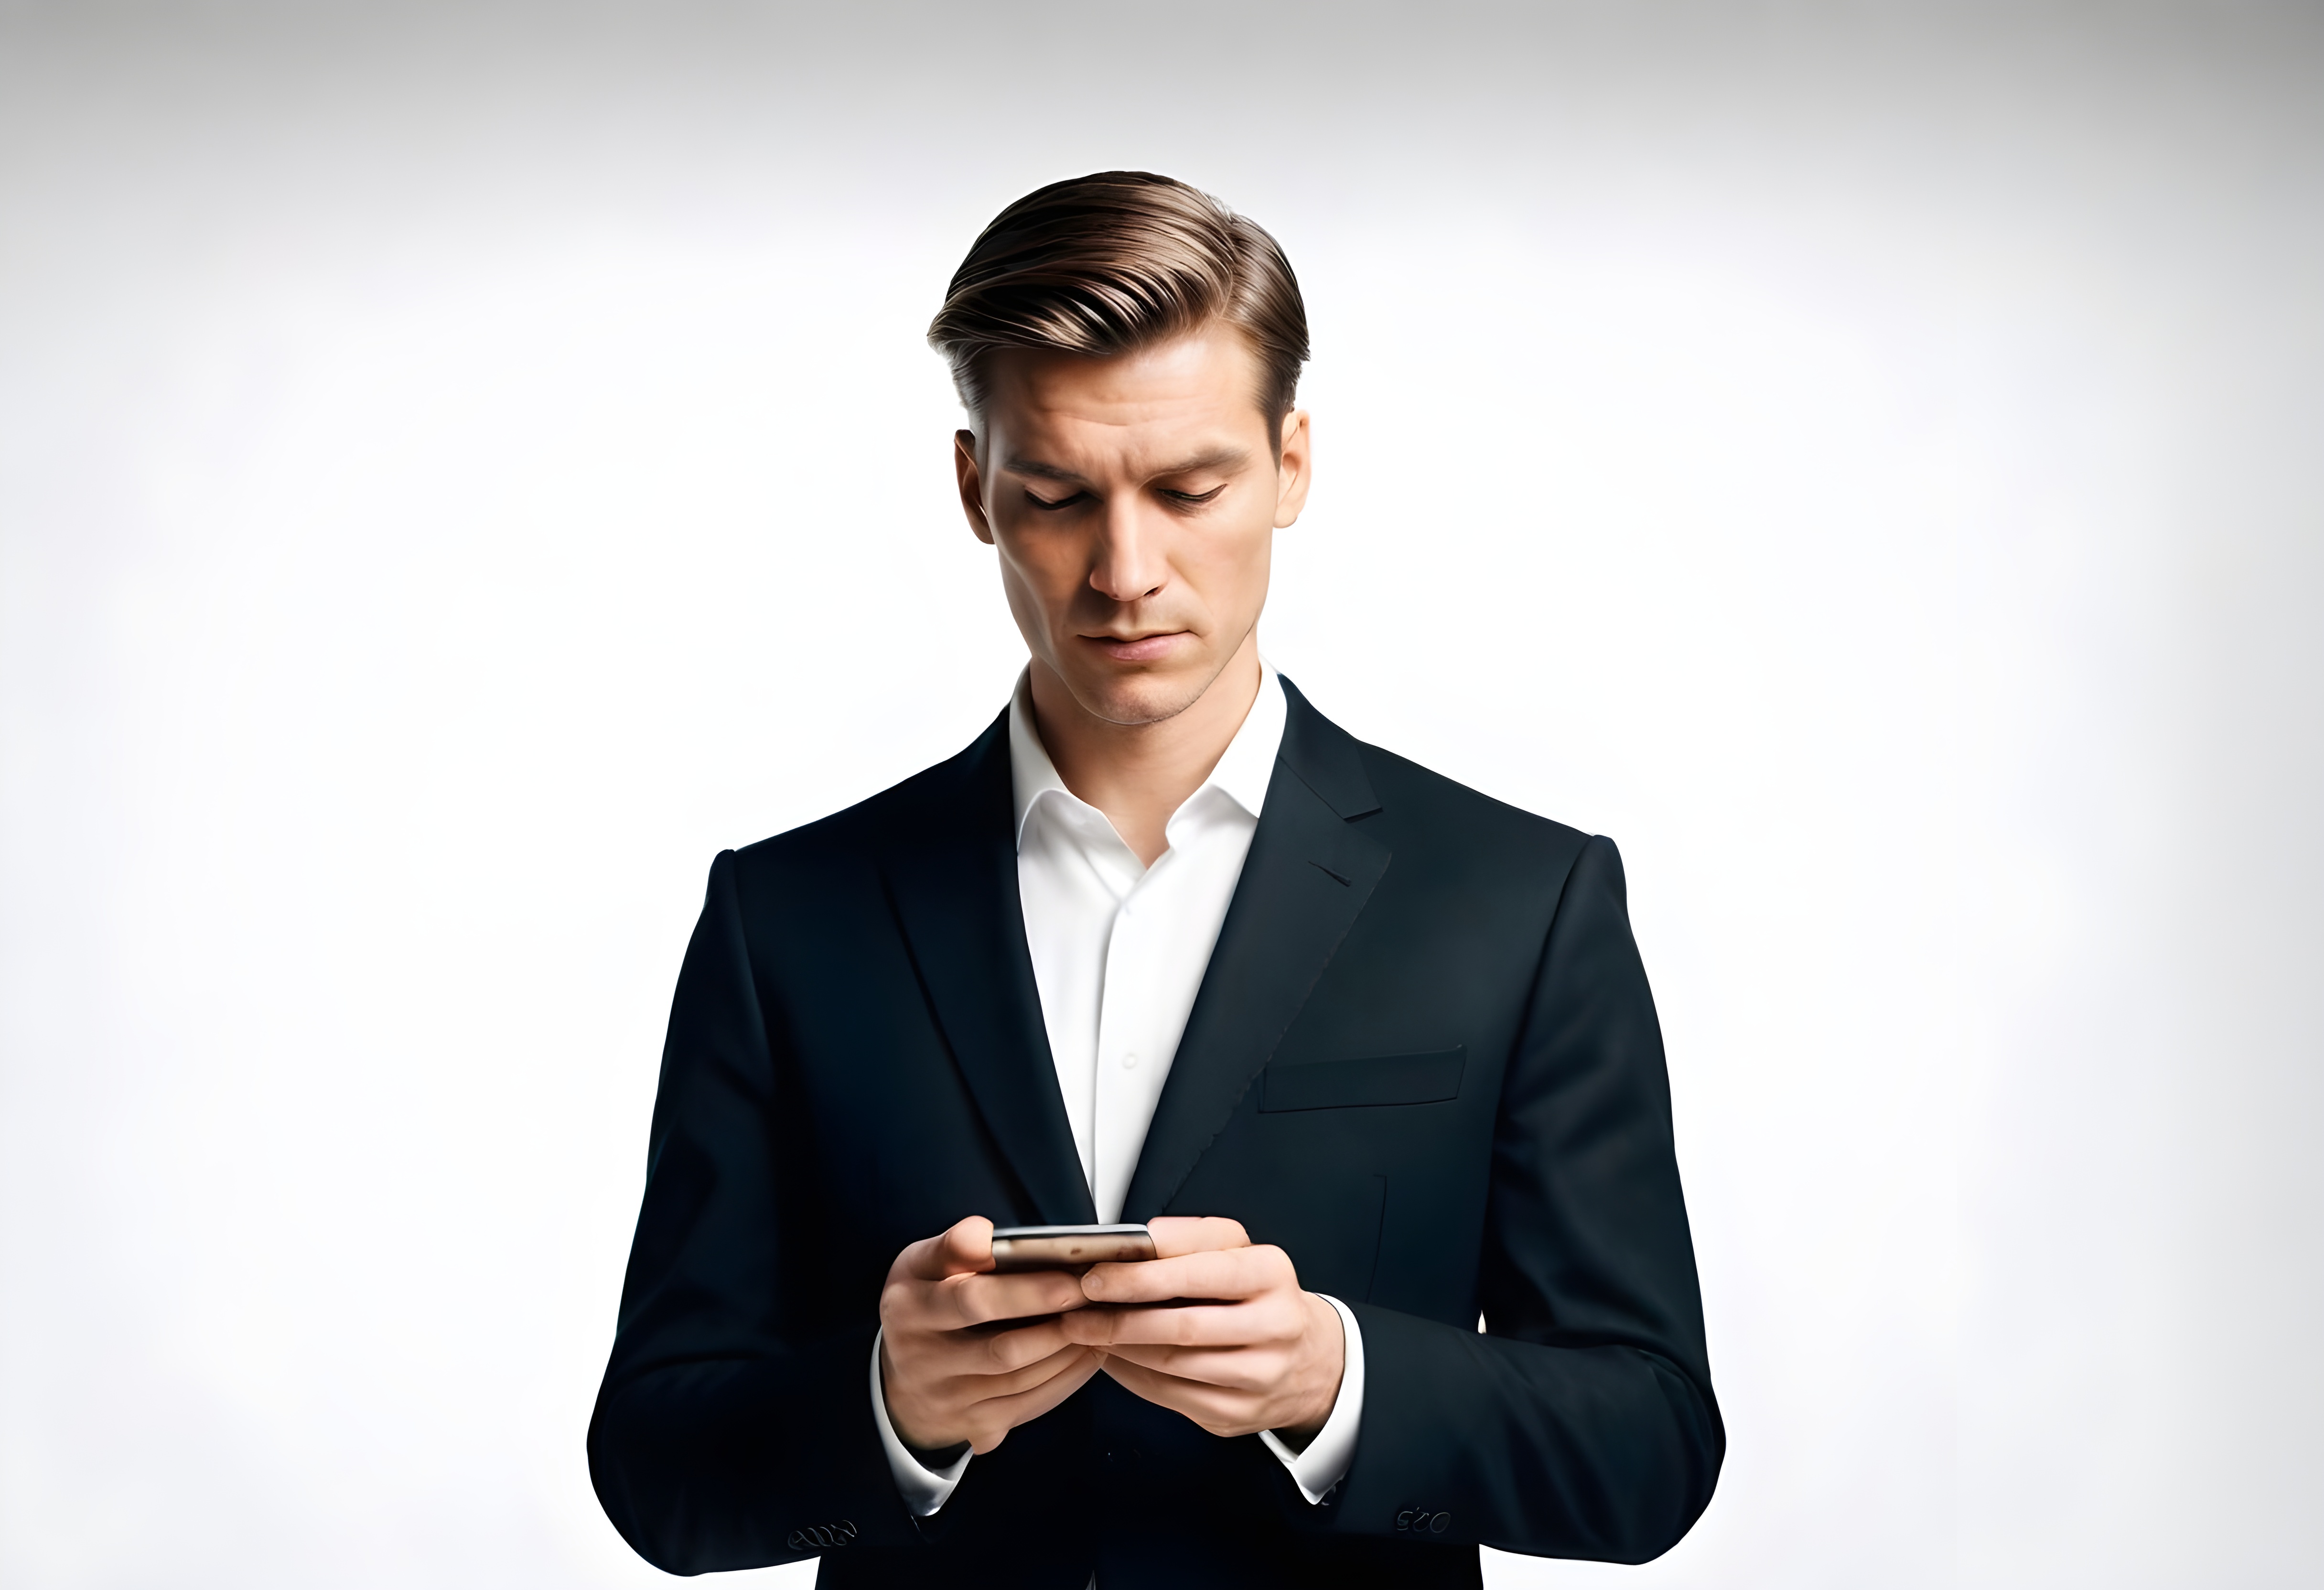 Free PNG - Black Suited Marketing Executive with Mobile | Free Stock Photos